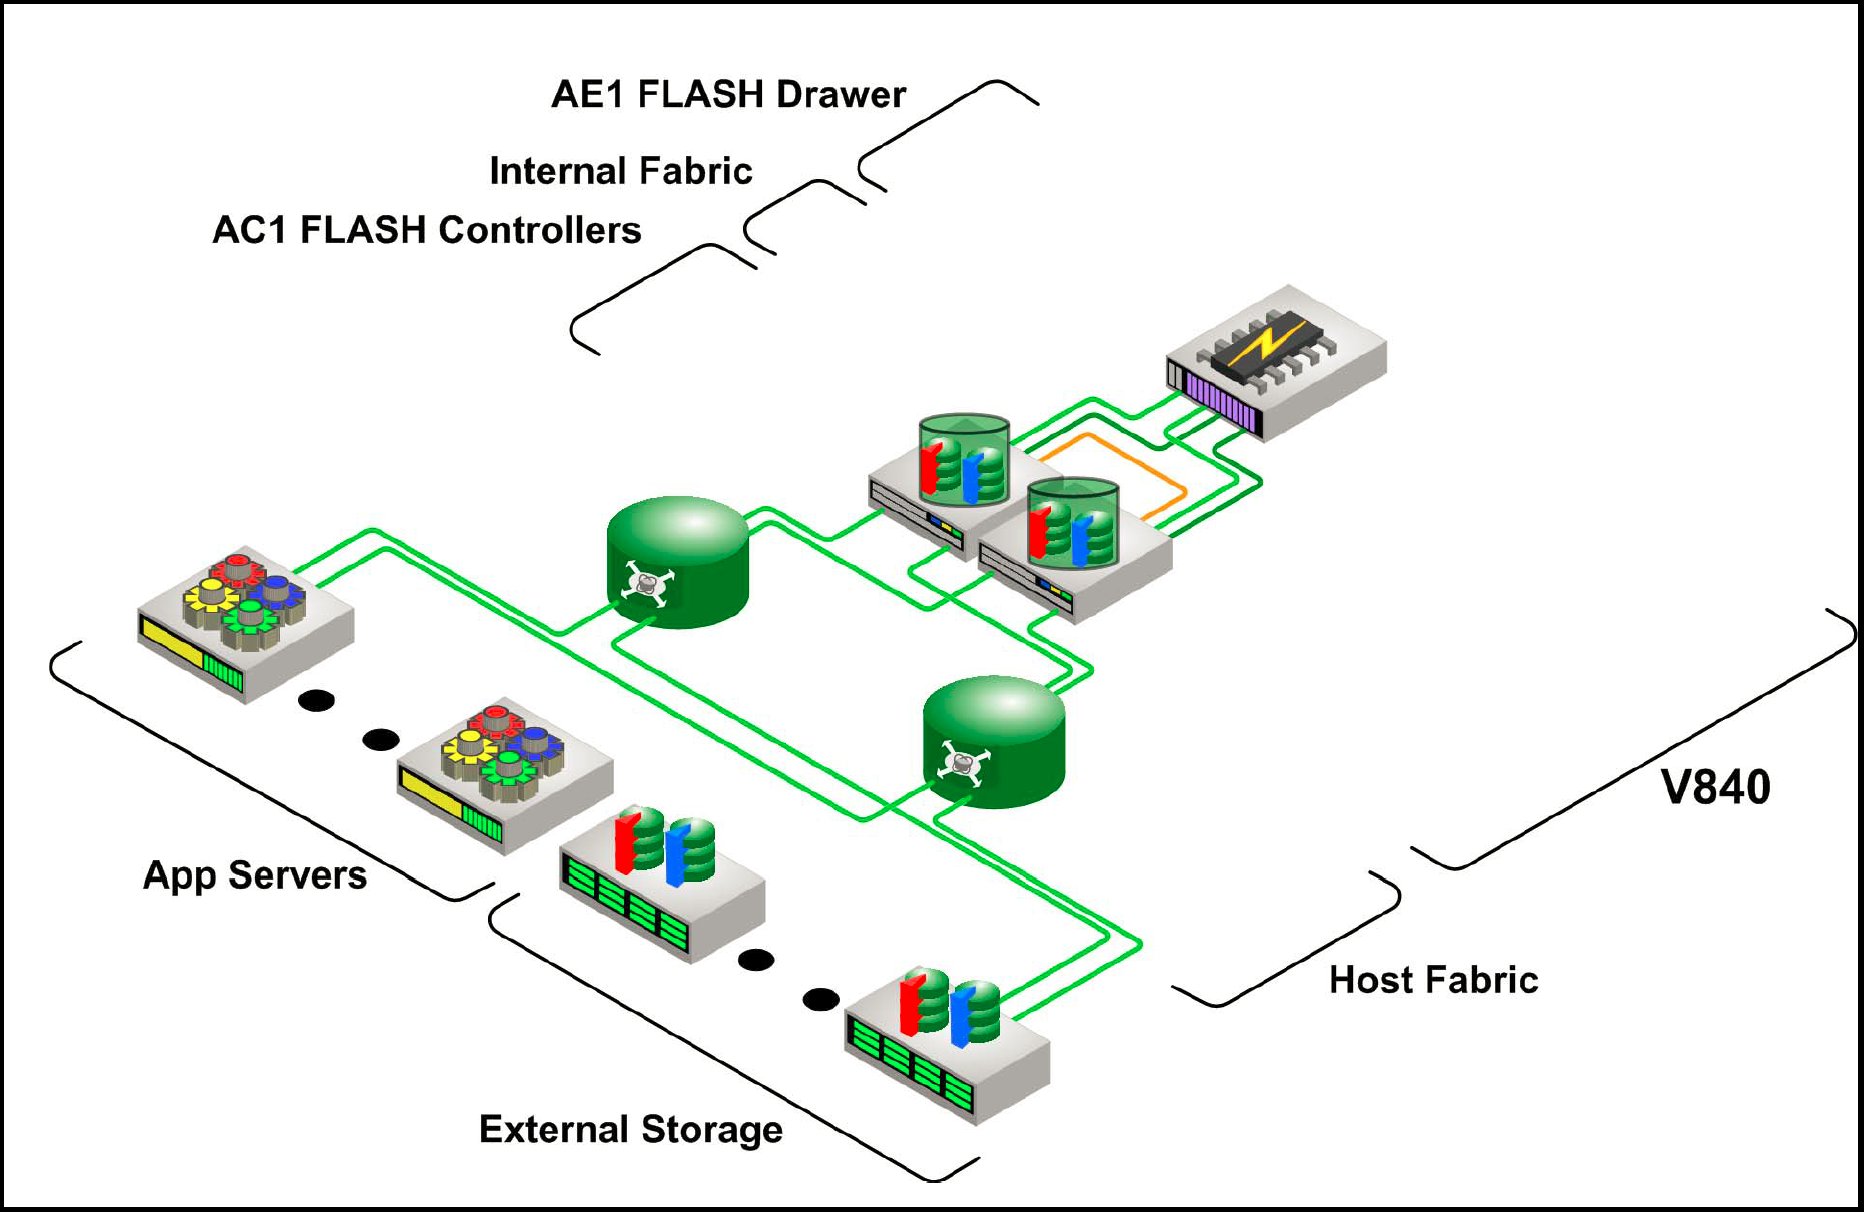 Flash drawer, internal fabric, Flash controllers, app servers, external storage, host fabric, and V840